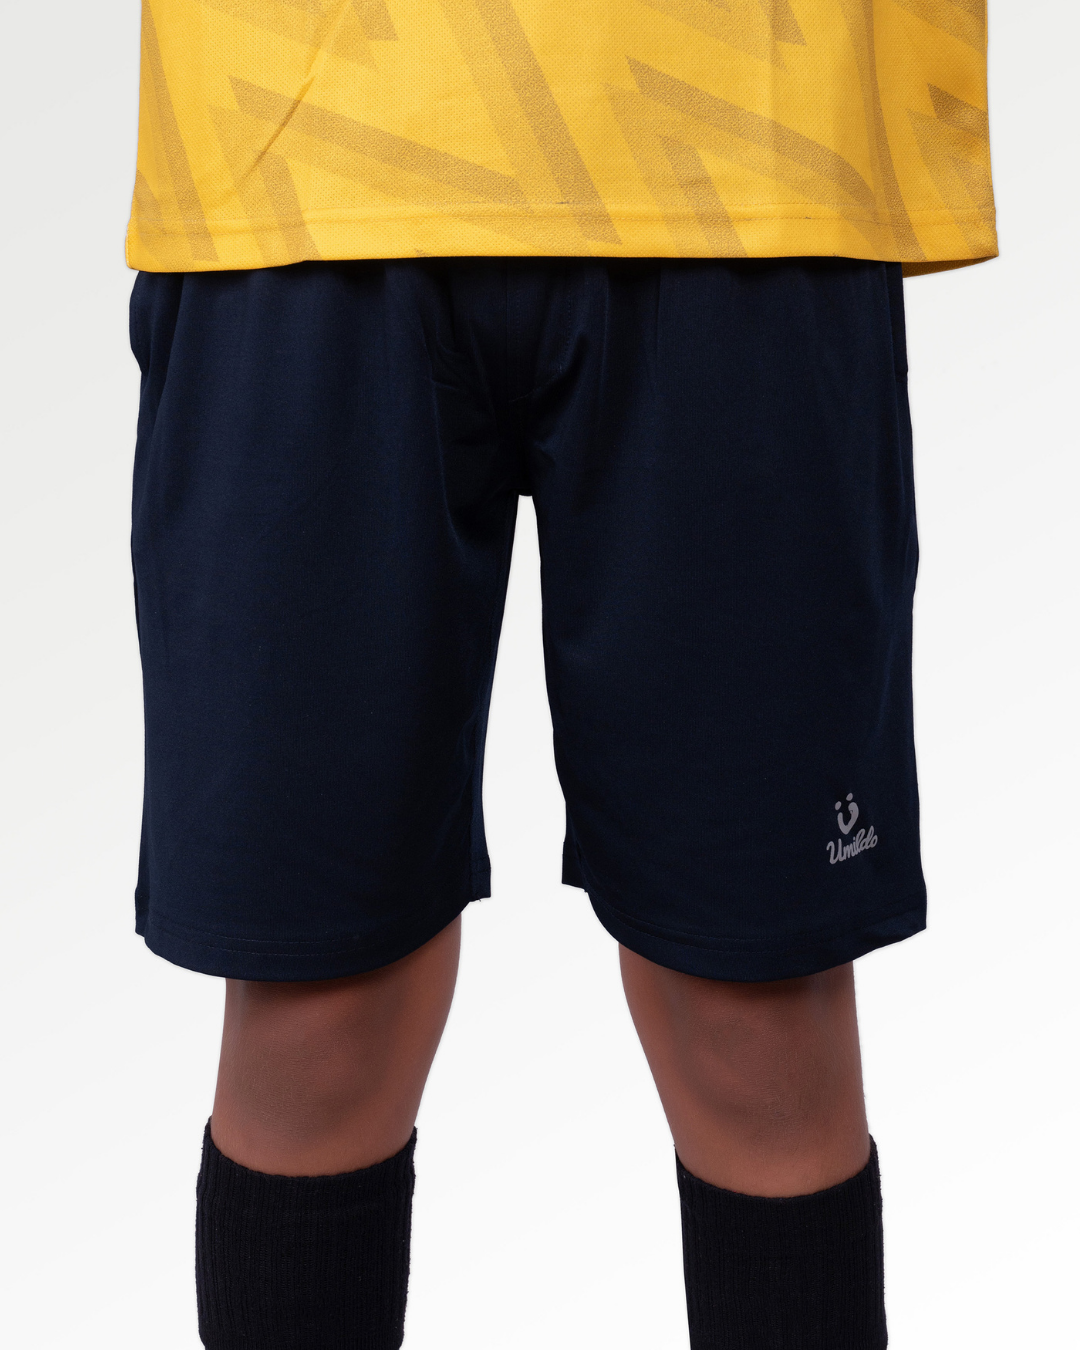 SOLID NAVY BLUE ACTIVE SHORTS